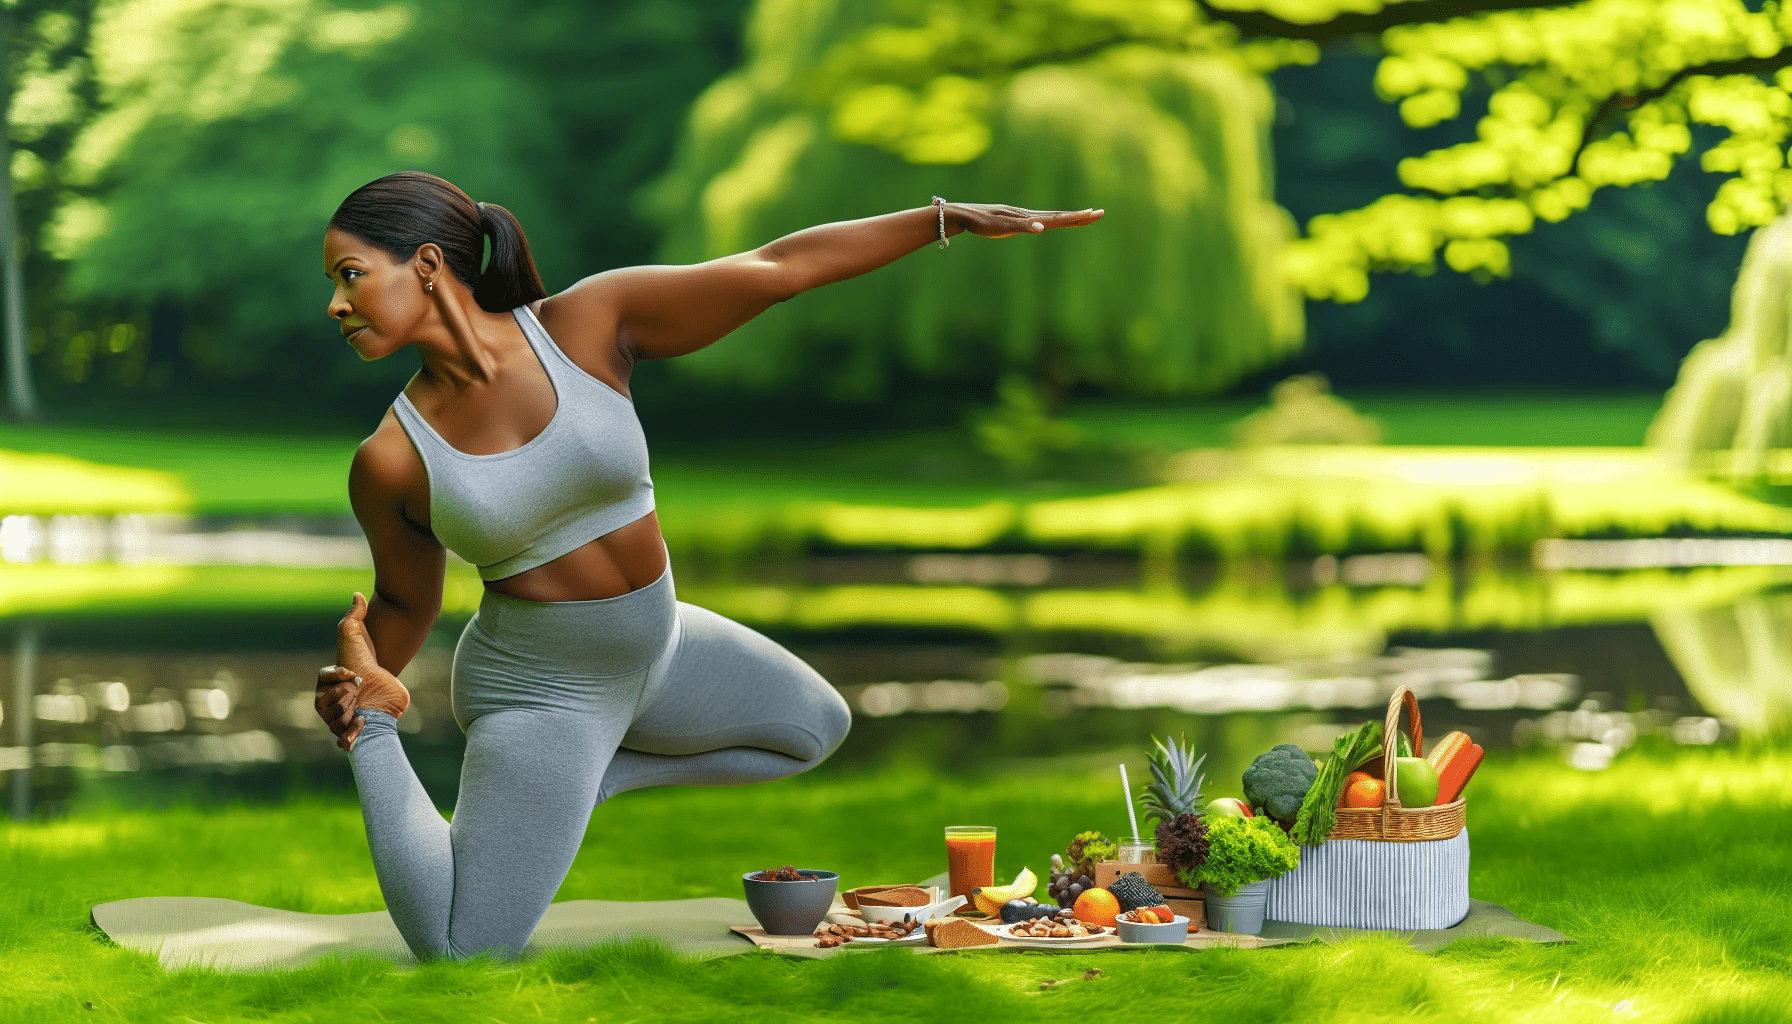 Photo of a person engaging in natural methods for boosting focus, such as exercise and a healthy diet